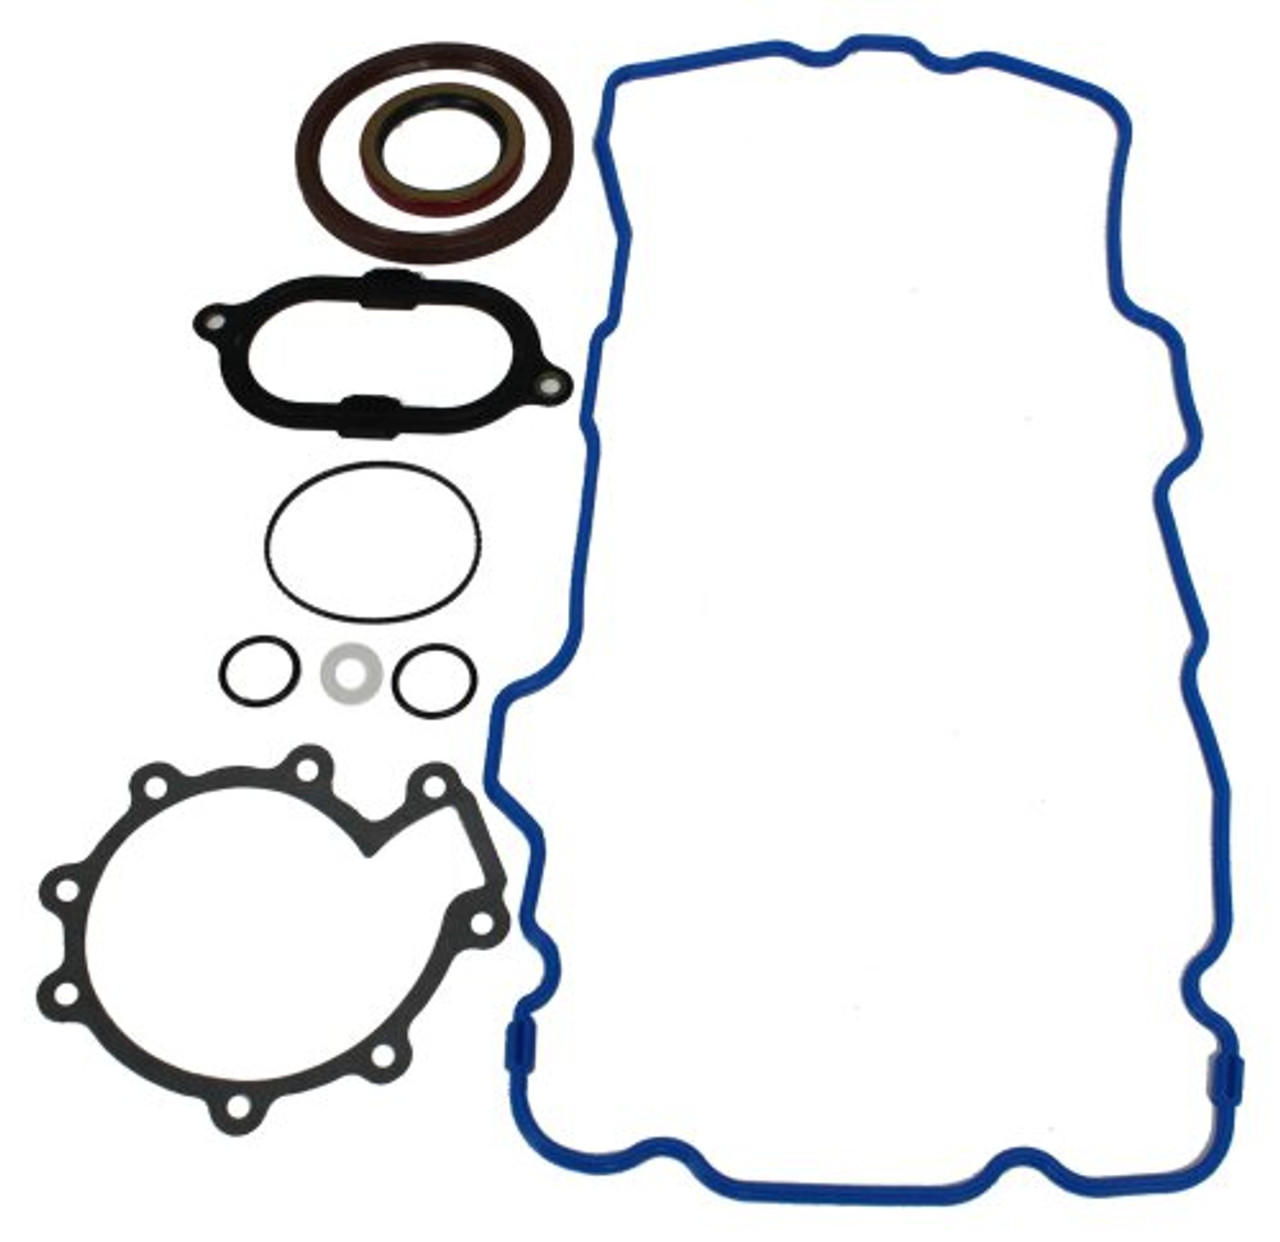 Lower Gasket Set - 2005 Ford Freestyle 3.0L Engine Parts # LGS4100ZE13